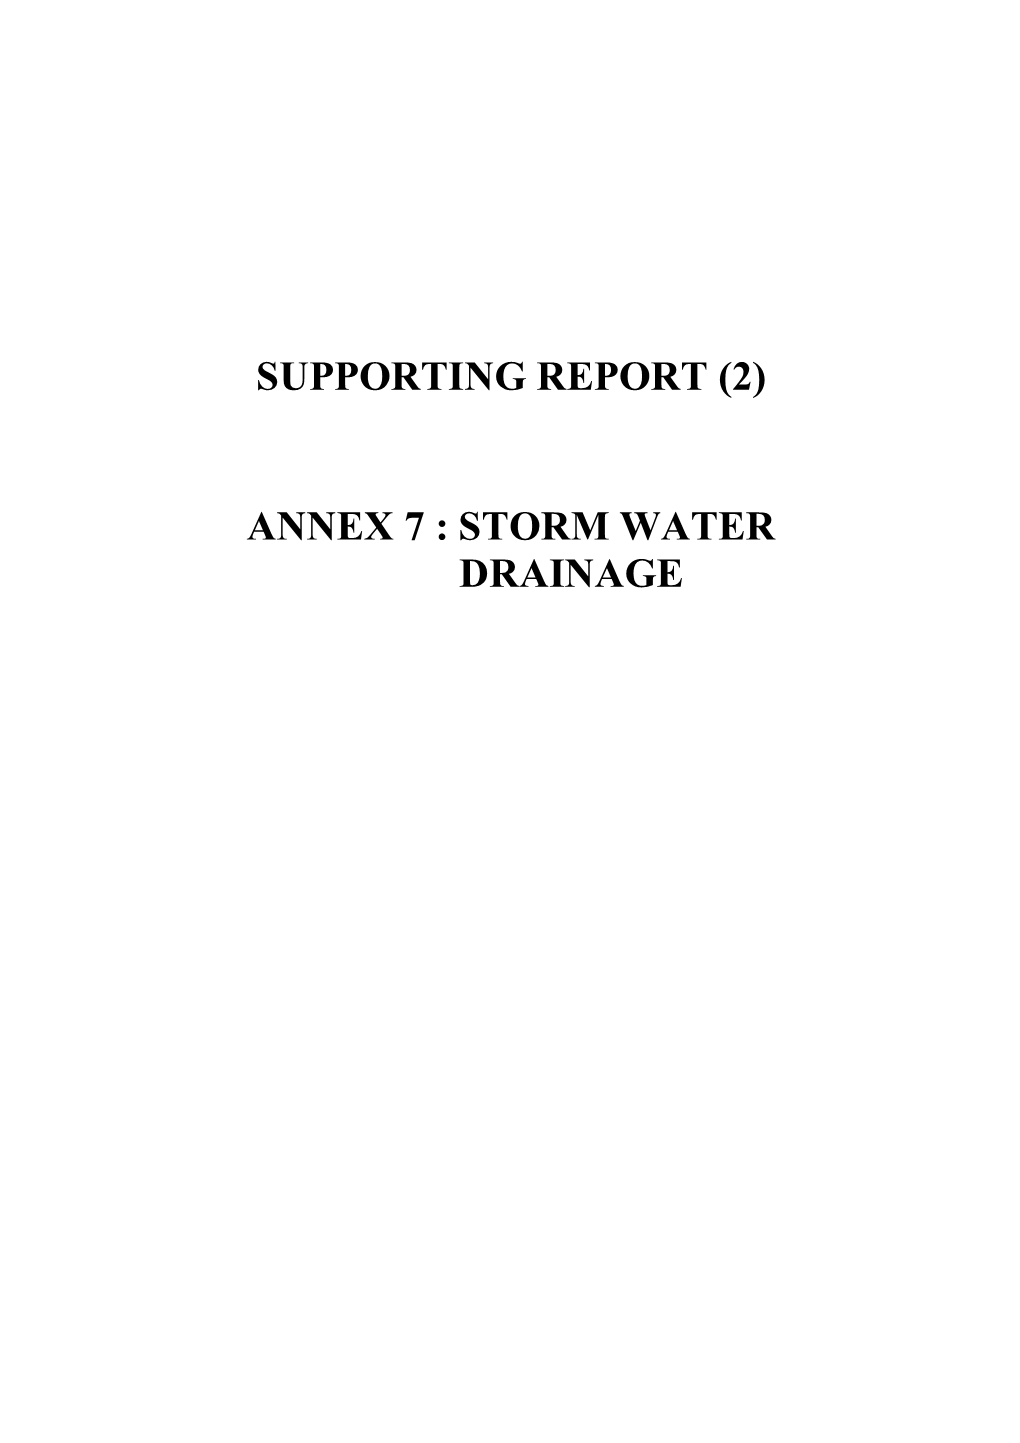 Supporting Report (2) Annex 7 : Storm Water Drainage